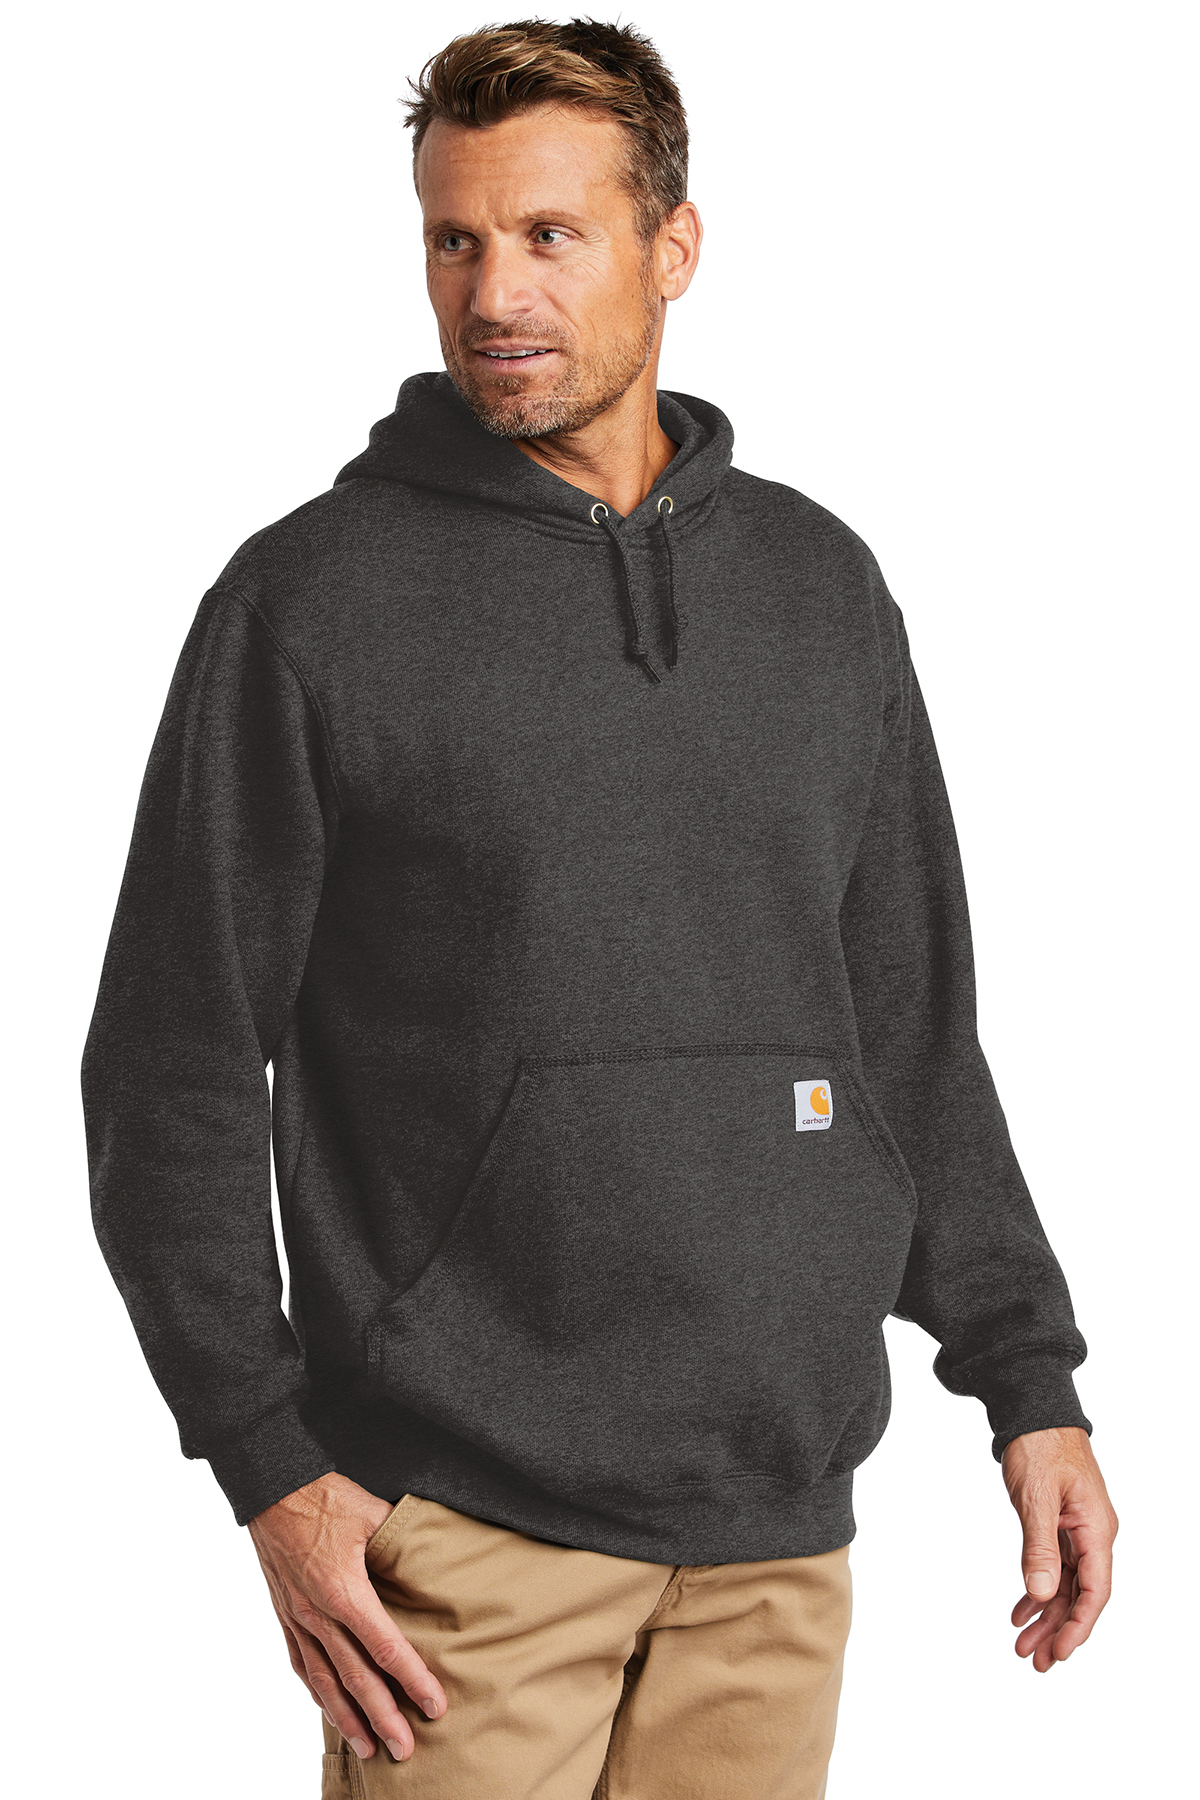 Carhartt Midweight Hooded Sweatshirt | Product | Company Casuals